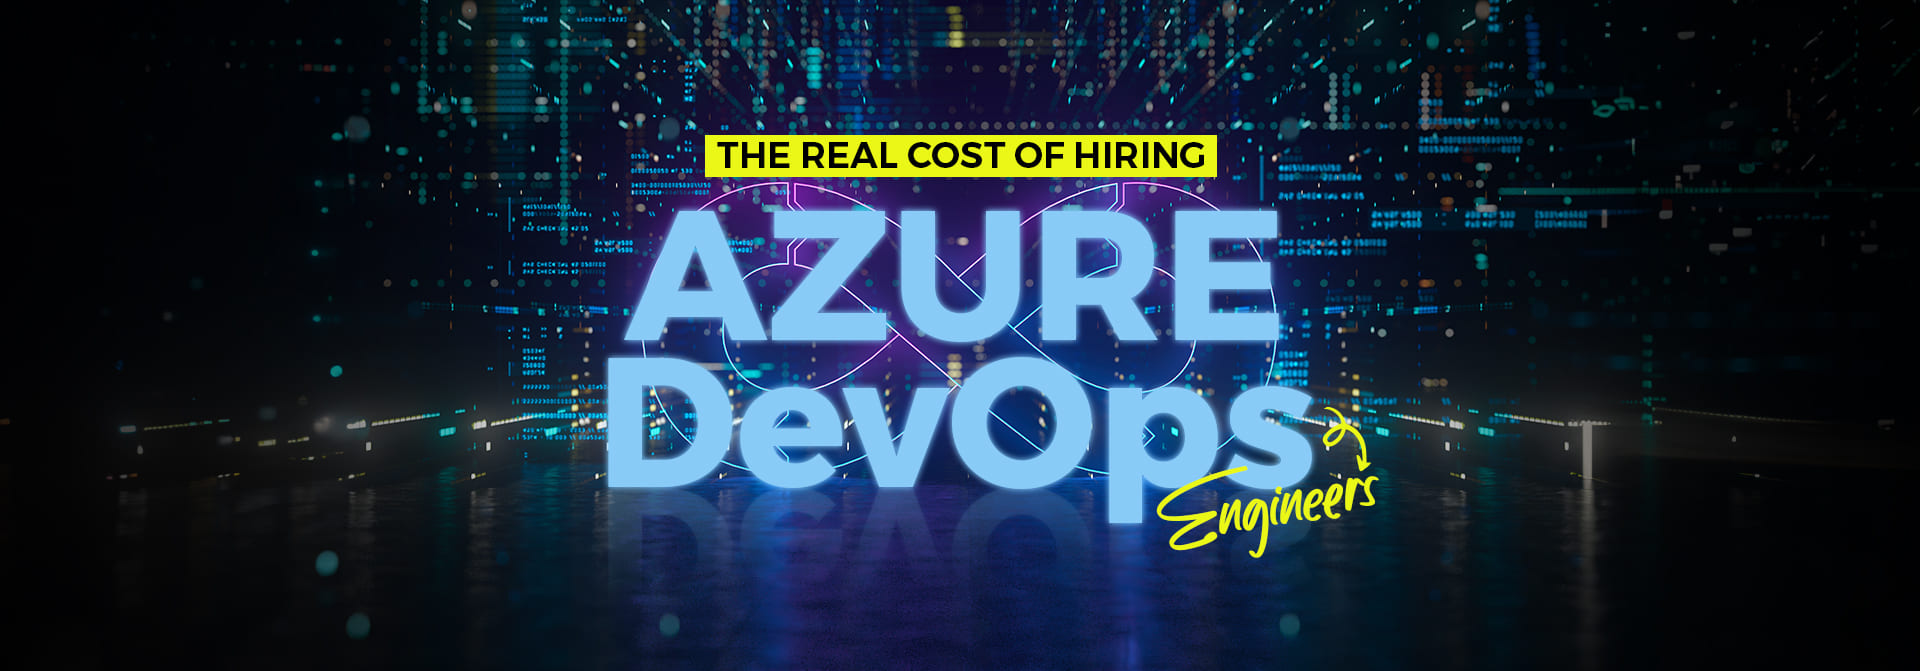 PAC Blog_The Real Cost of Hiring Azure DevOps Engineers_main banner